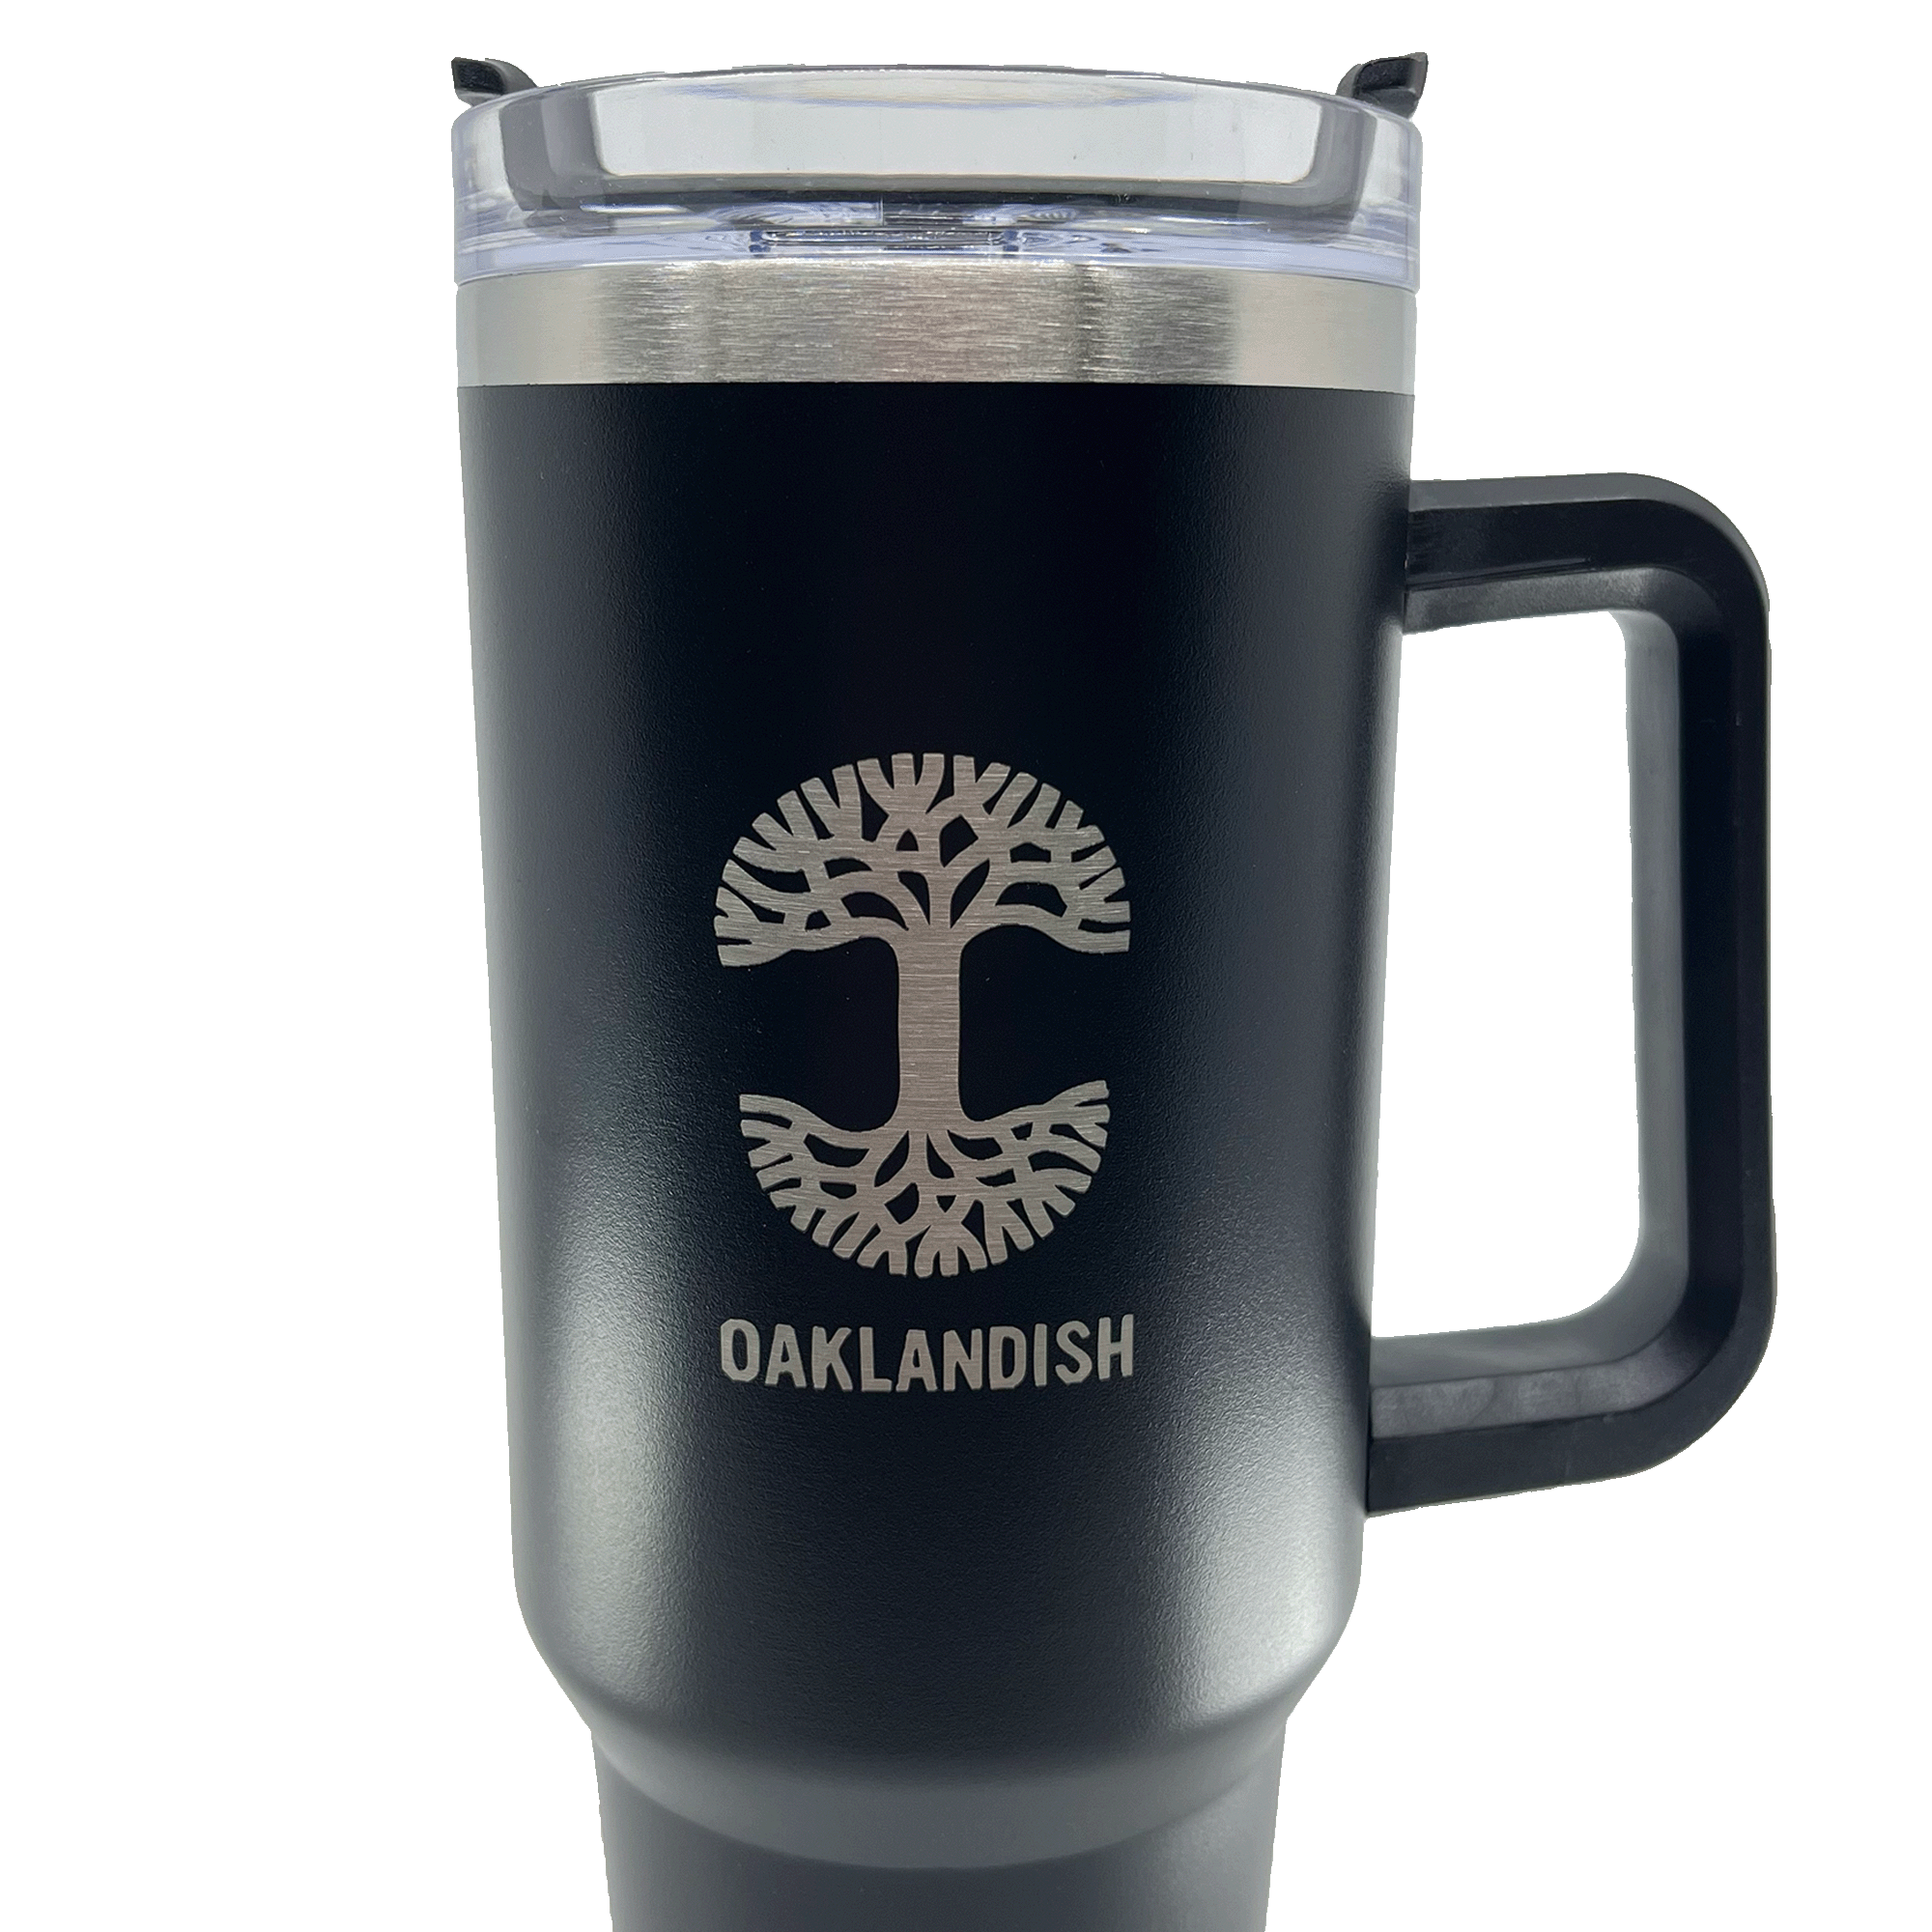 Close up of the Oaklandish logo and wordmark on a black double walled 40-oz stainless steel travel drink tumbler.